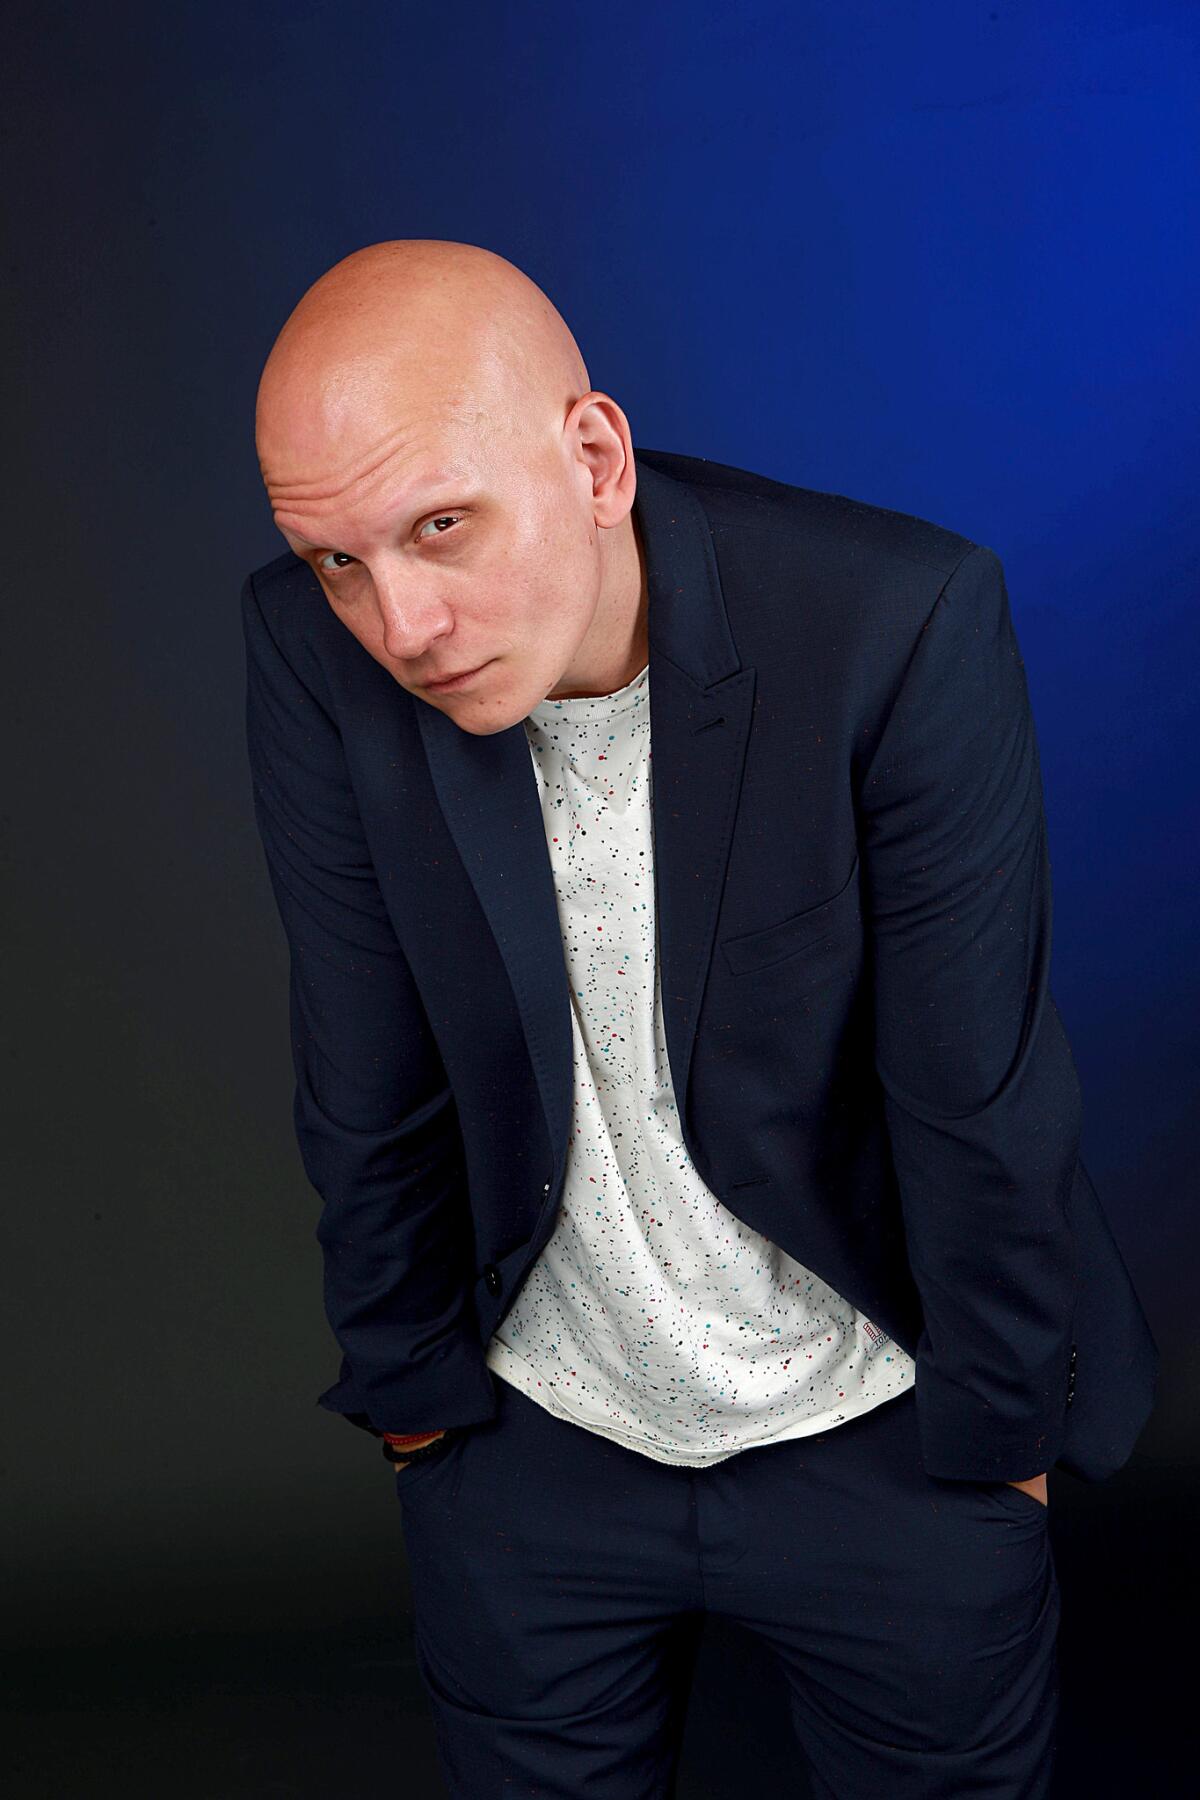 Anthony Carrigan is known for playing Victor Zsasz in the Fox series "Gotham" and Tyler Davies in the ABC series "The Forgotten." He currently plays NoHo Hank in the HBO series "Barry."